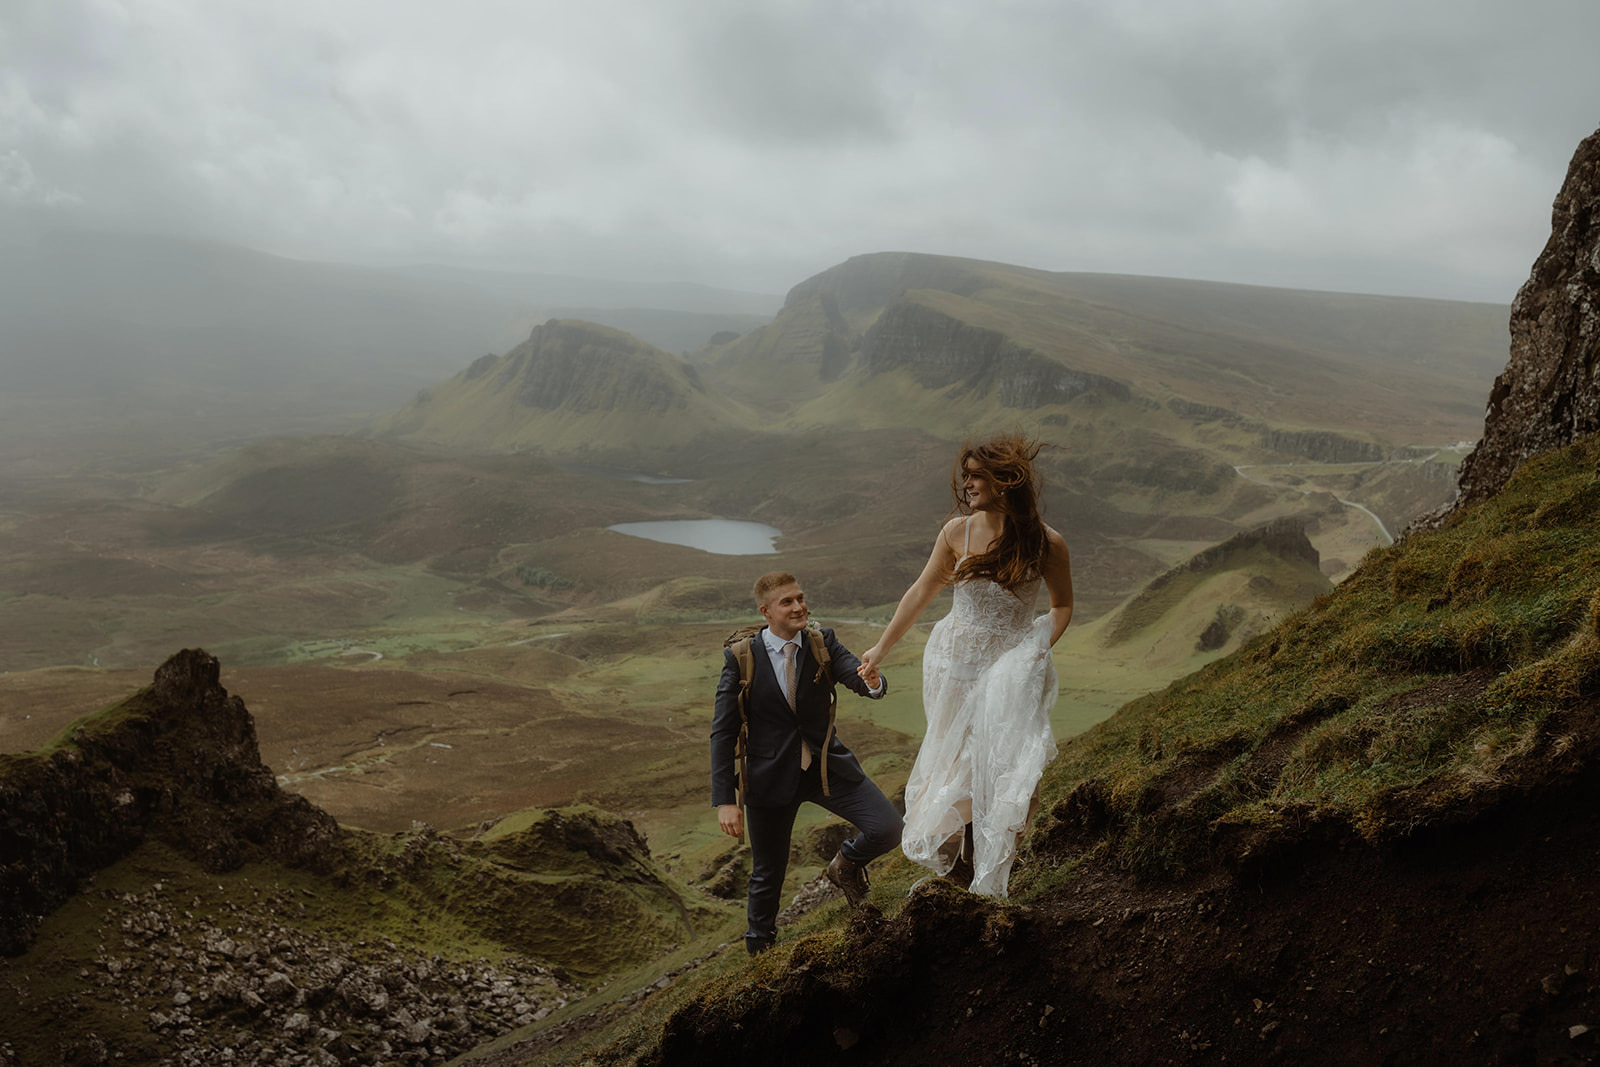 Elopement couples Emma and Matthew pose for a photo at Quiraing, Isle of Skye, with mountains in the background.